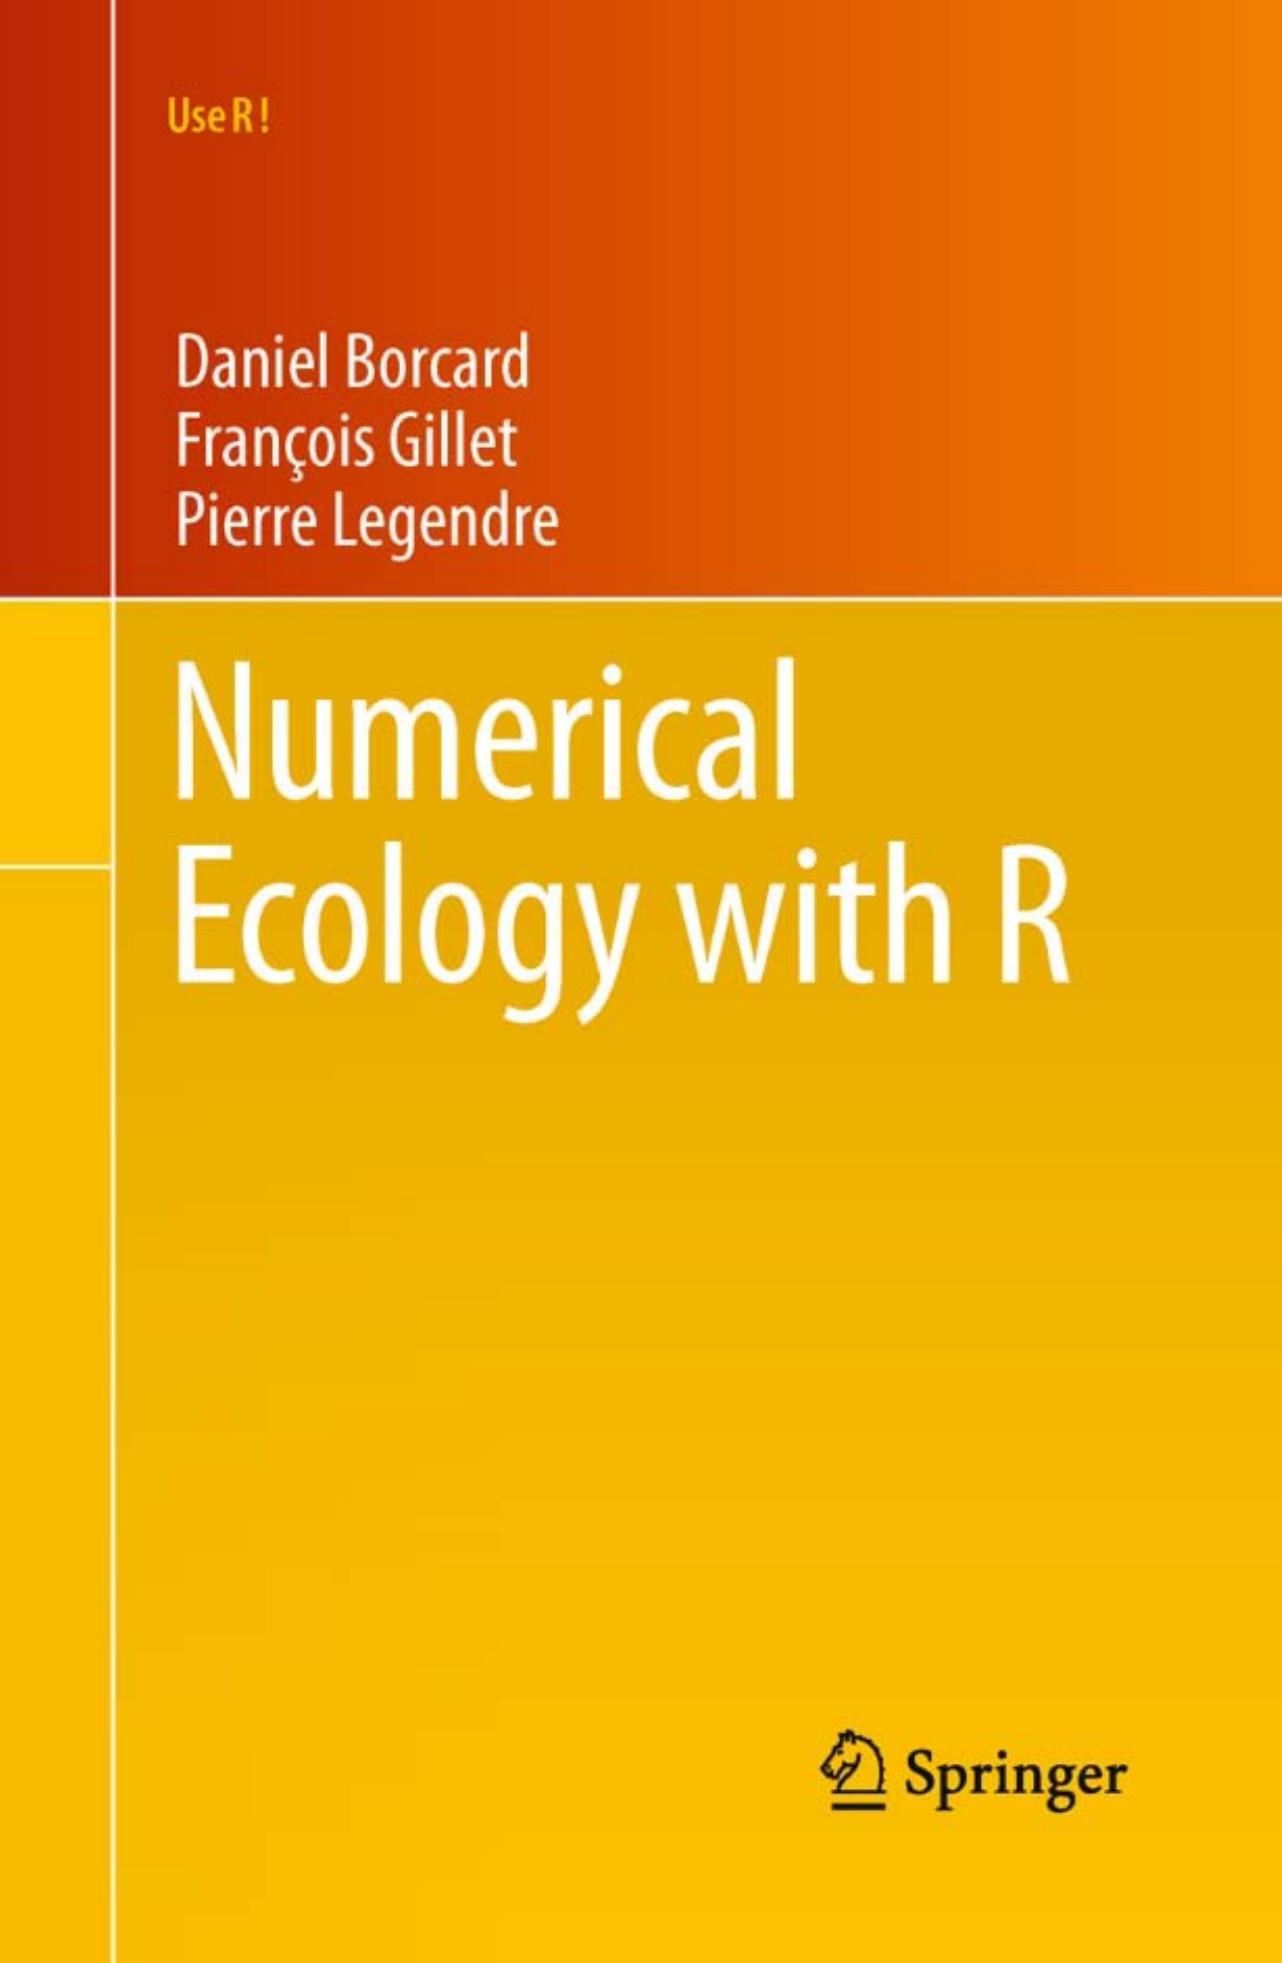 Numerical Ecology with R (Use R)